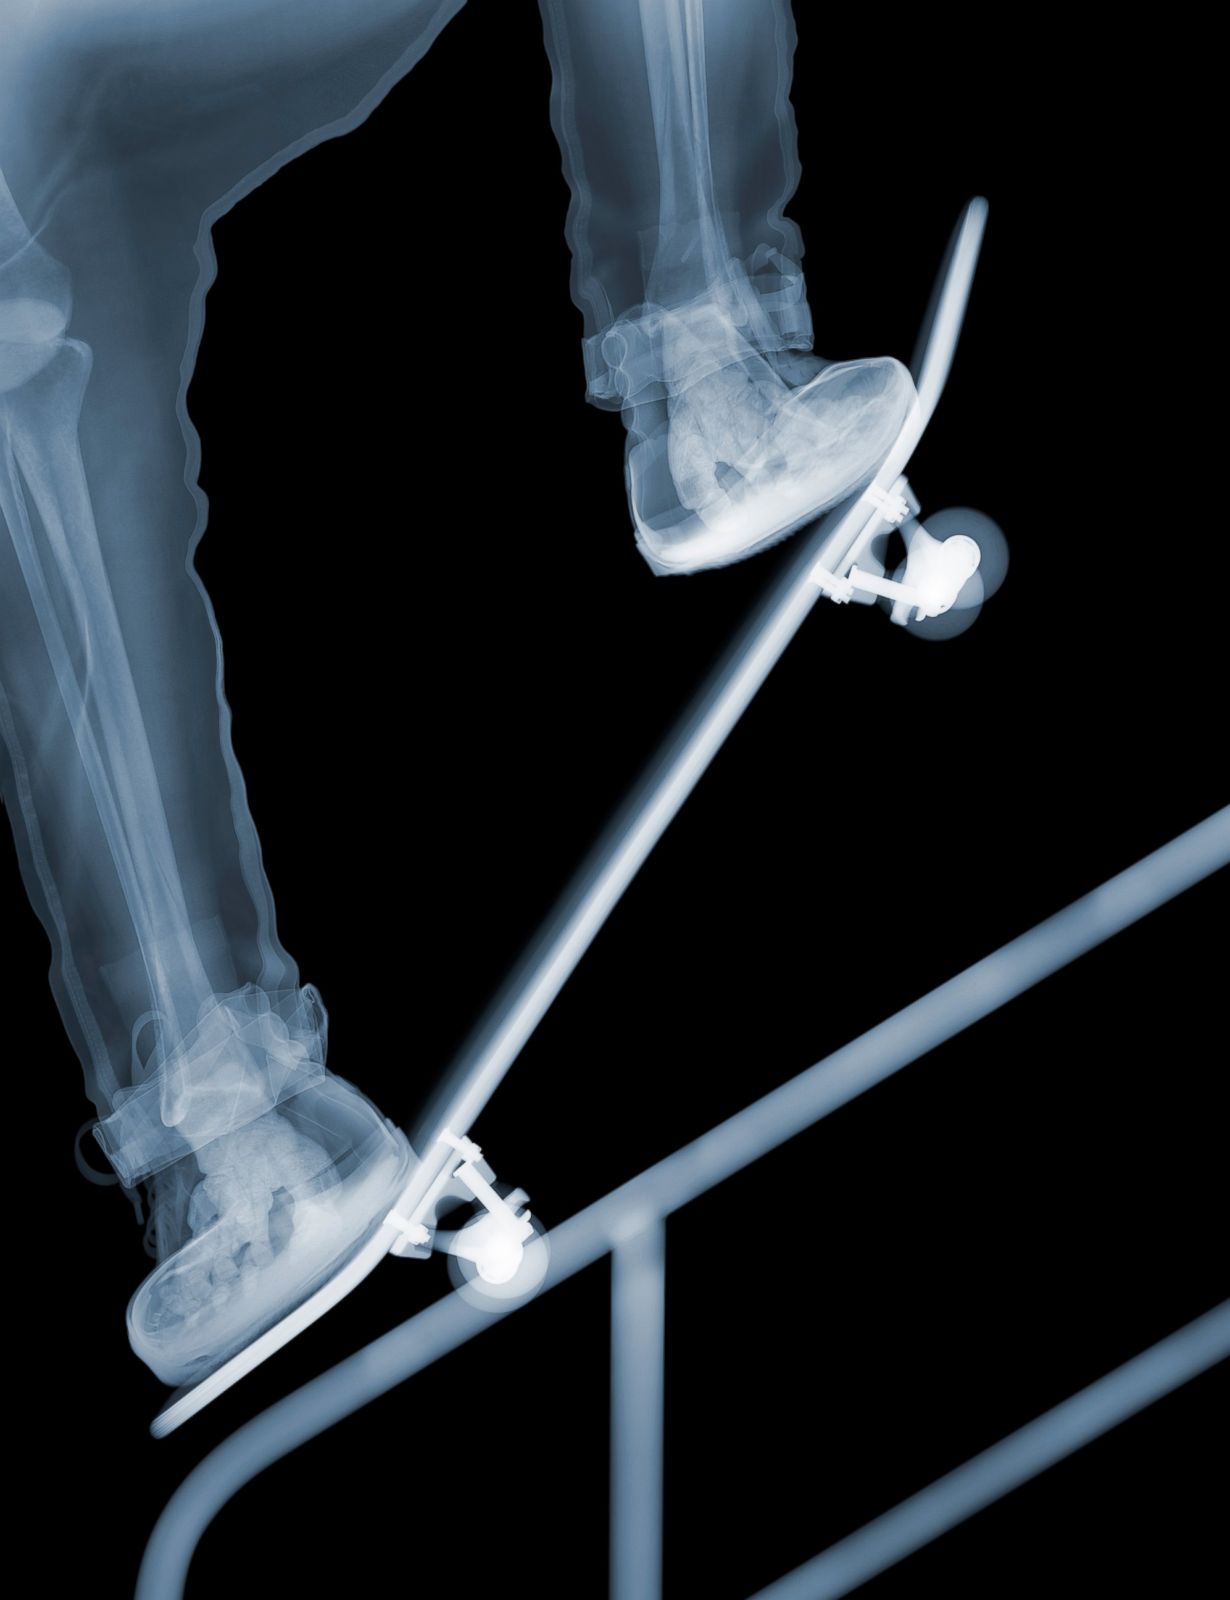 Skater Picture Nick Veasey S X Ray Art Abc News